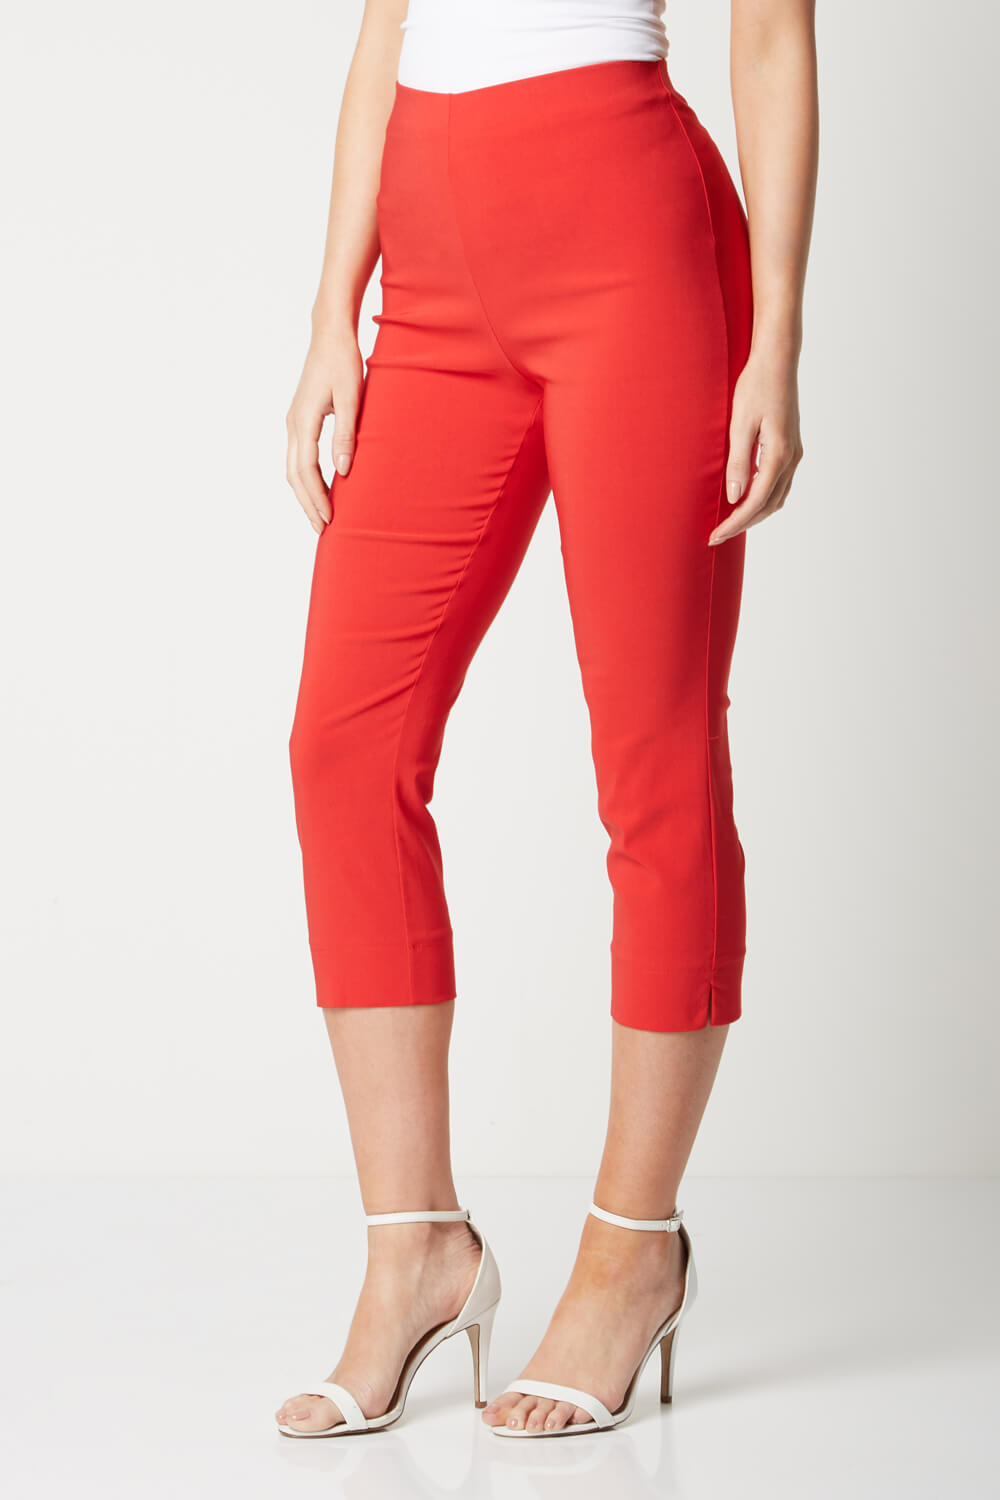 Red Cropped Stretch Trouser, Image 2 of 5